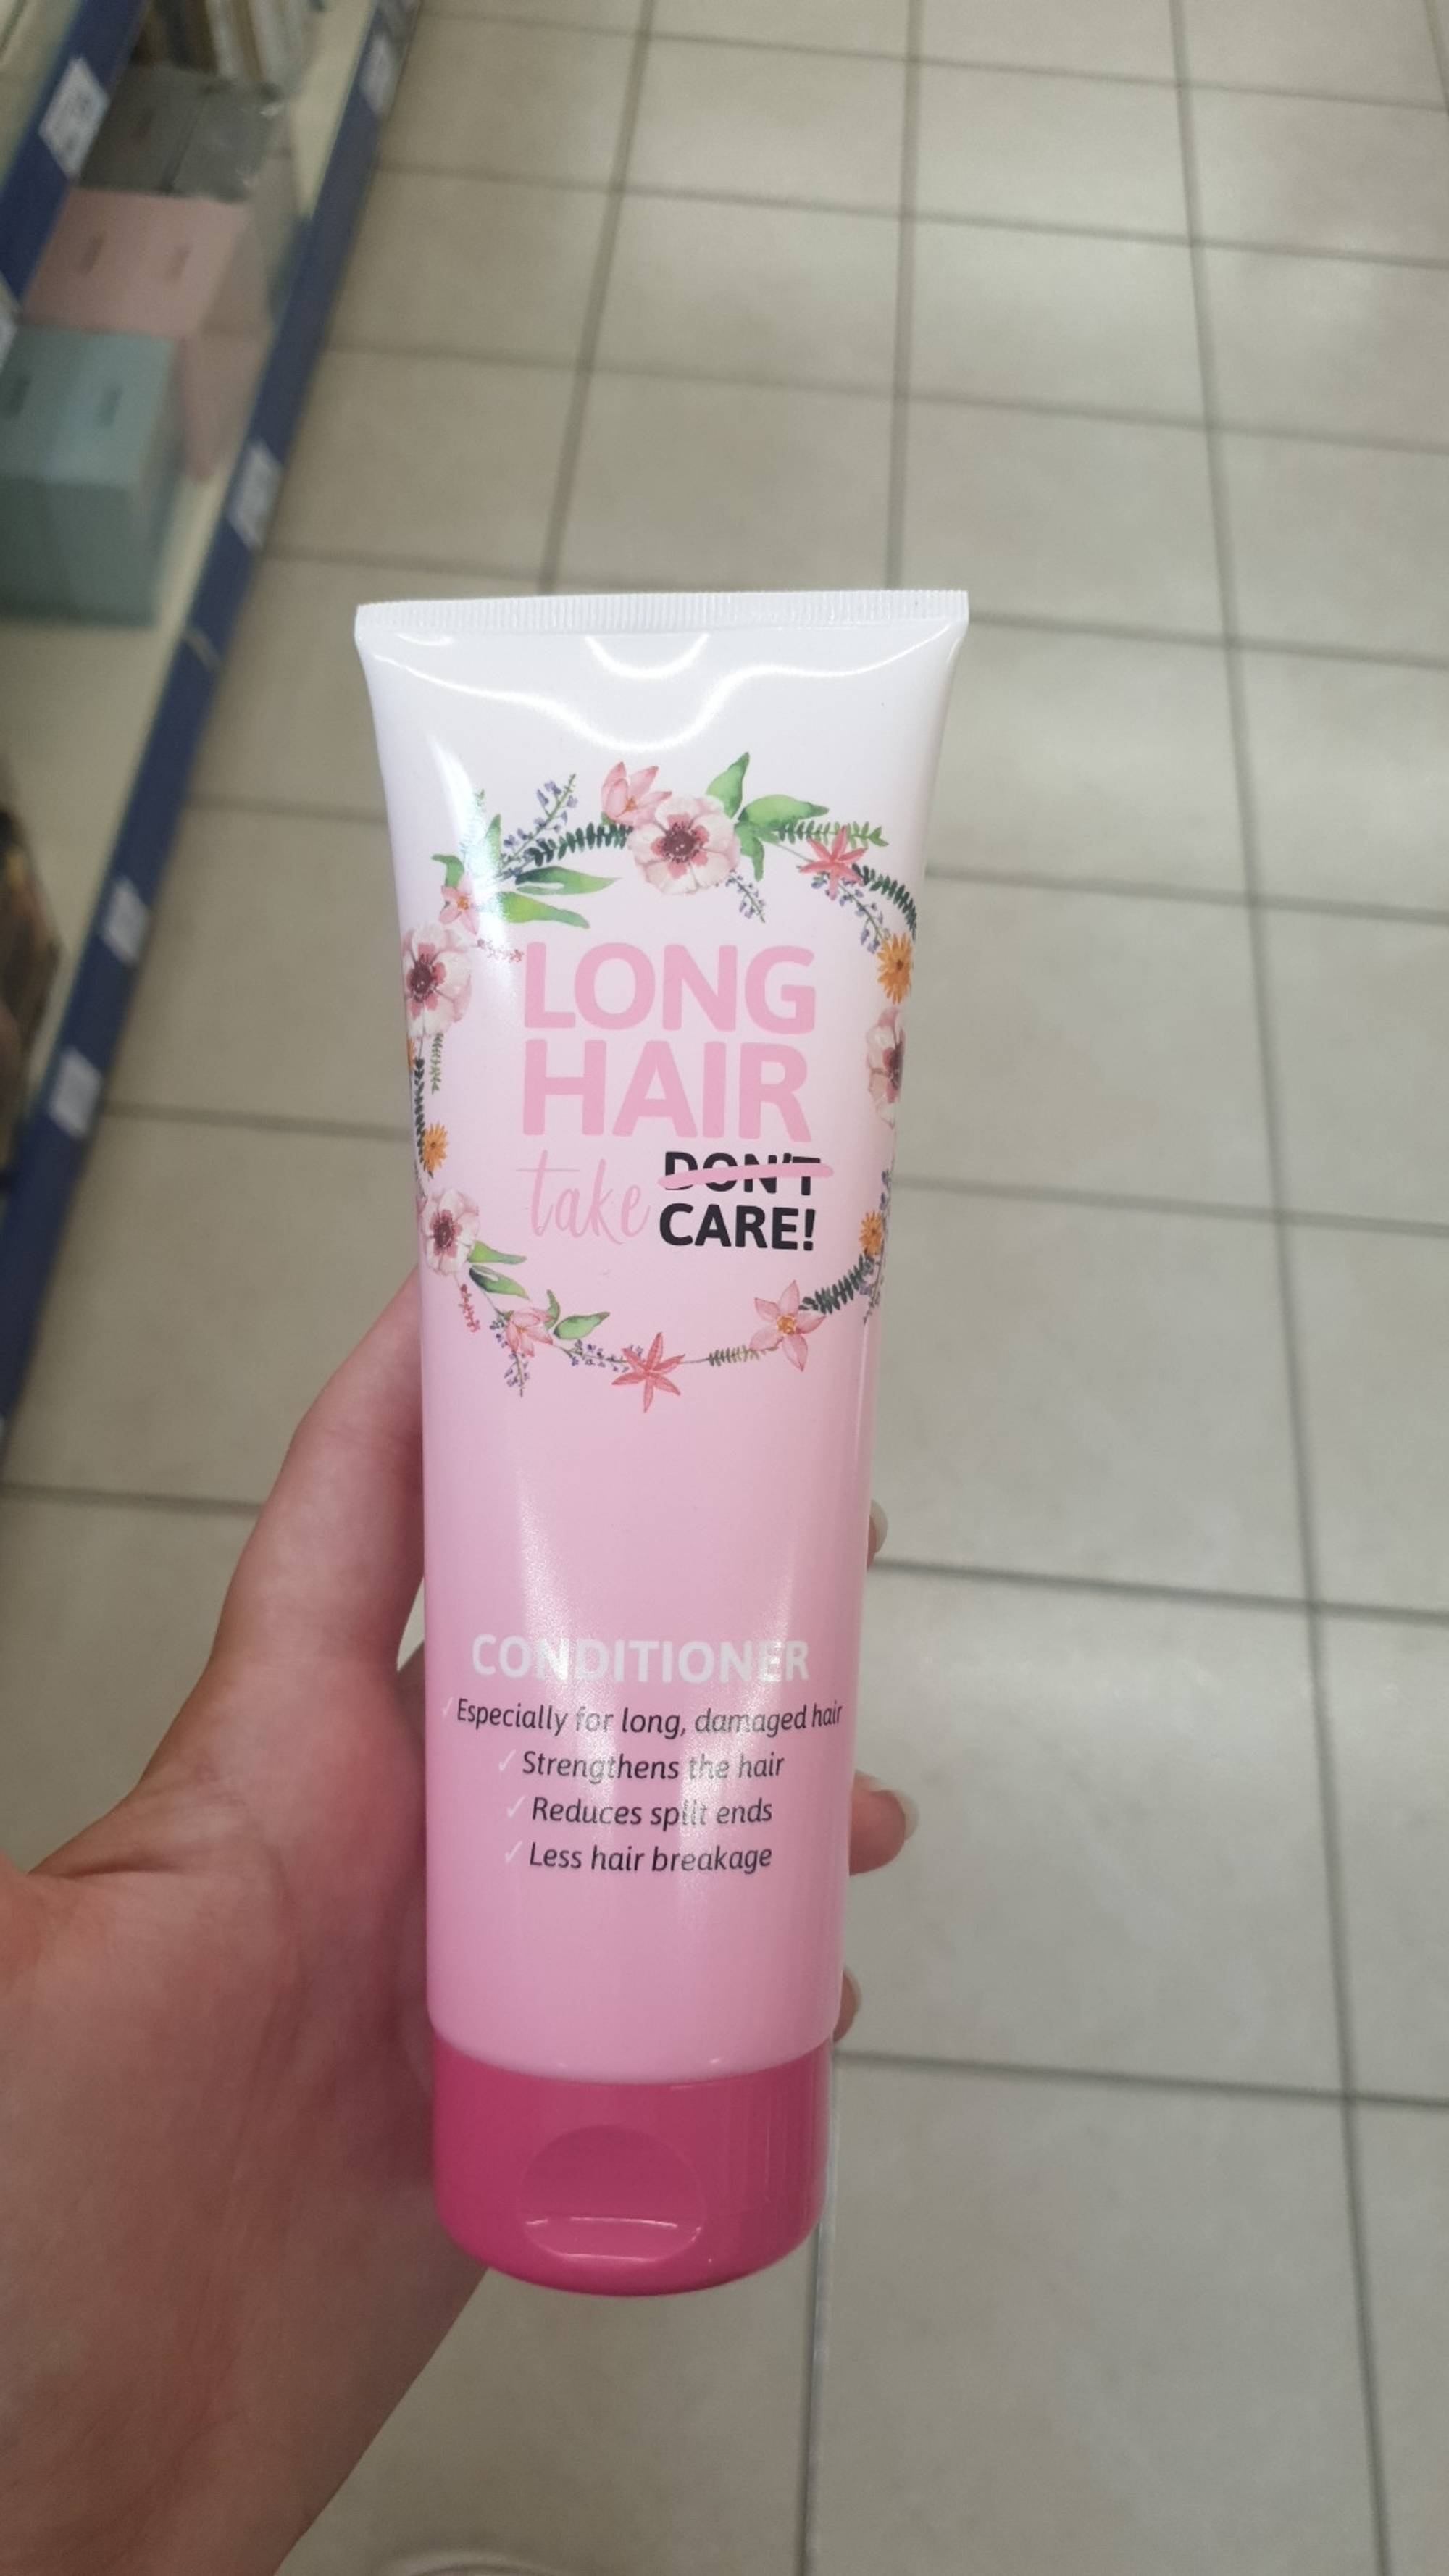 LONG HAIR - Take care! - Conditioner 